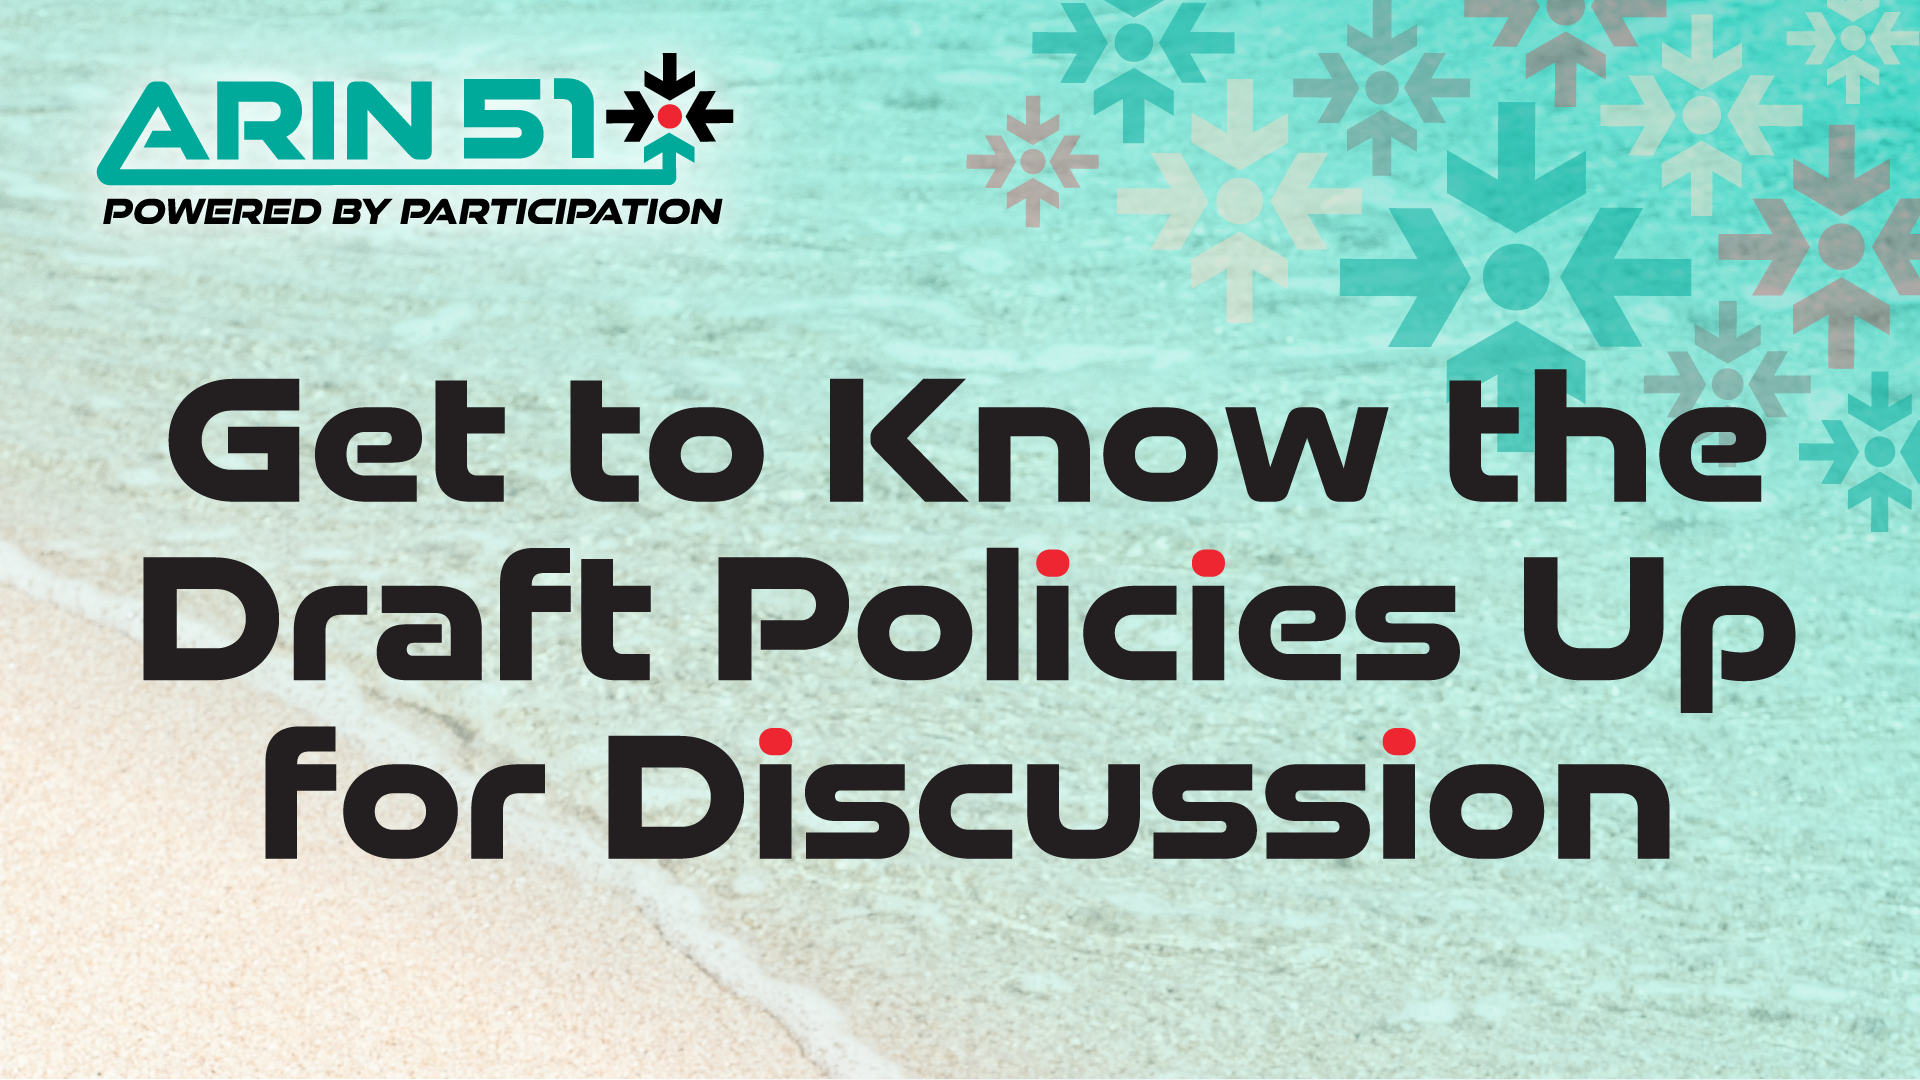 Get to Know the Draft Policies Up for Discussion at ARIN 51 